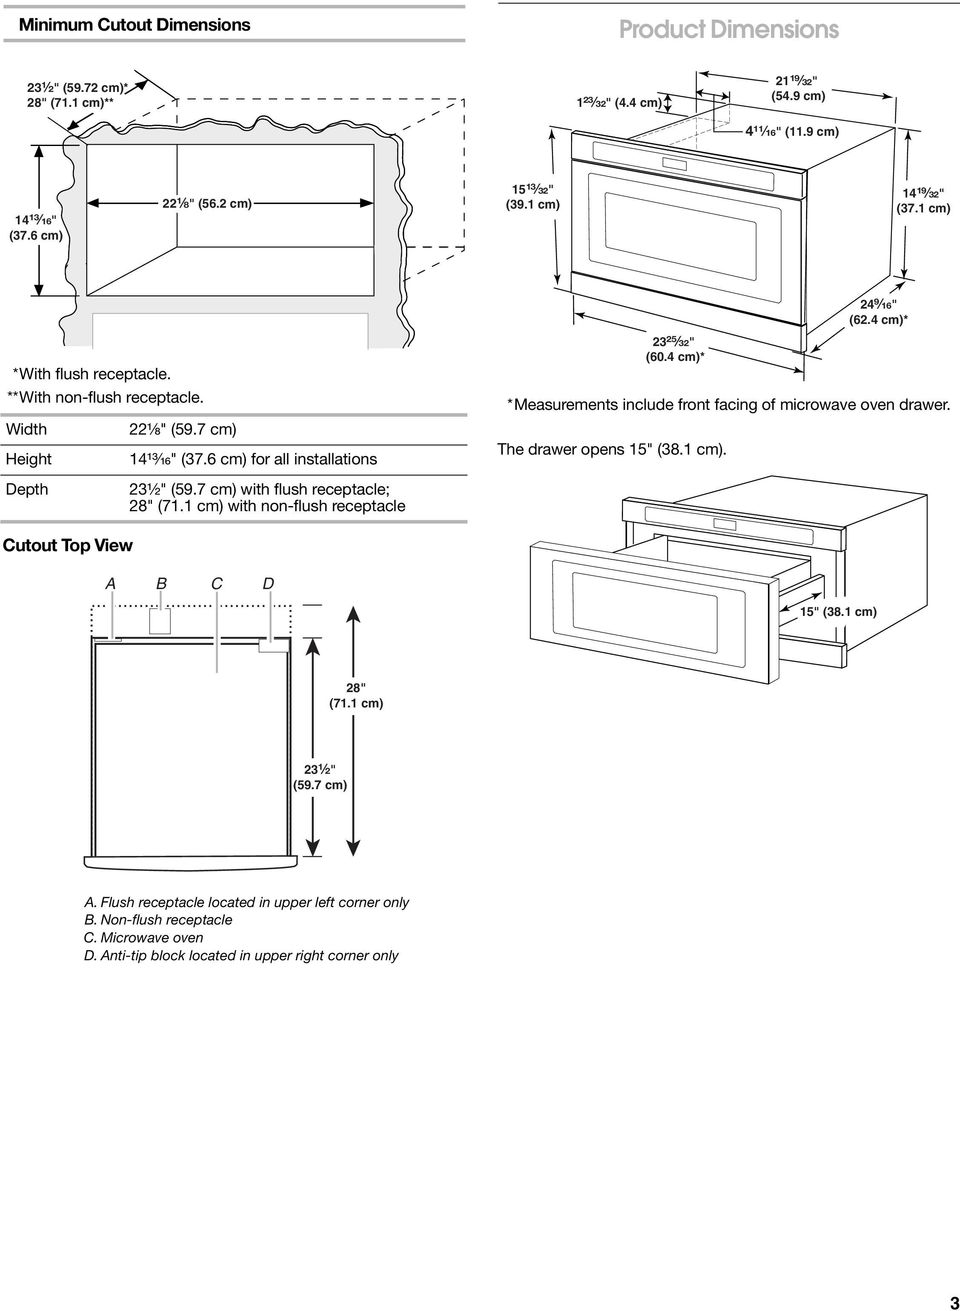 7 cm) with flush receptacle; 28" (71.1 cm) with non-flush receptacle 23²⁵ ₃₂" (60.4 cm)* *Measurements include front facing of microwave oven drawer. The drawer opens 15" (38.1 cm). 24⁹ ₁₆" (62.